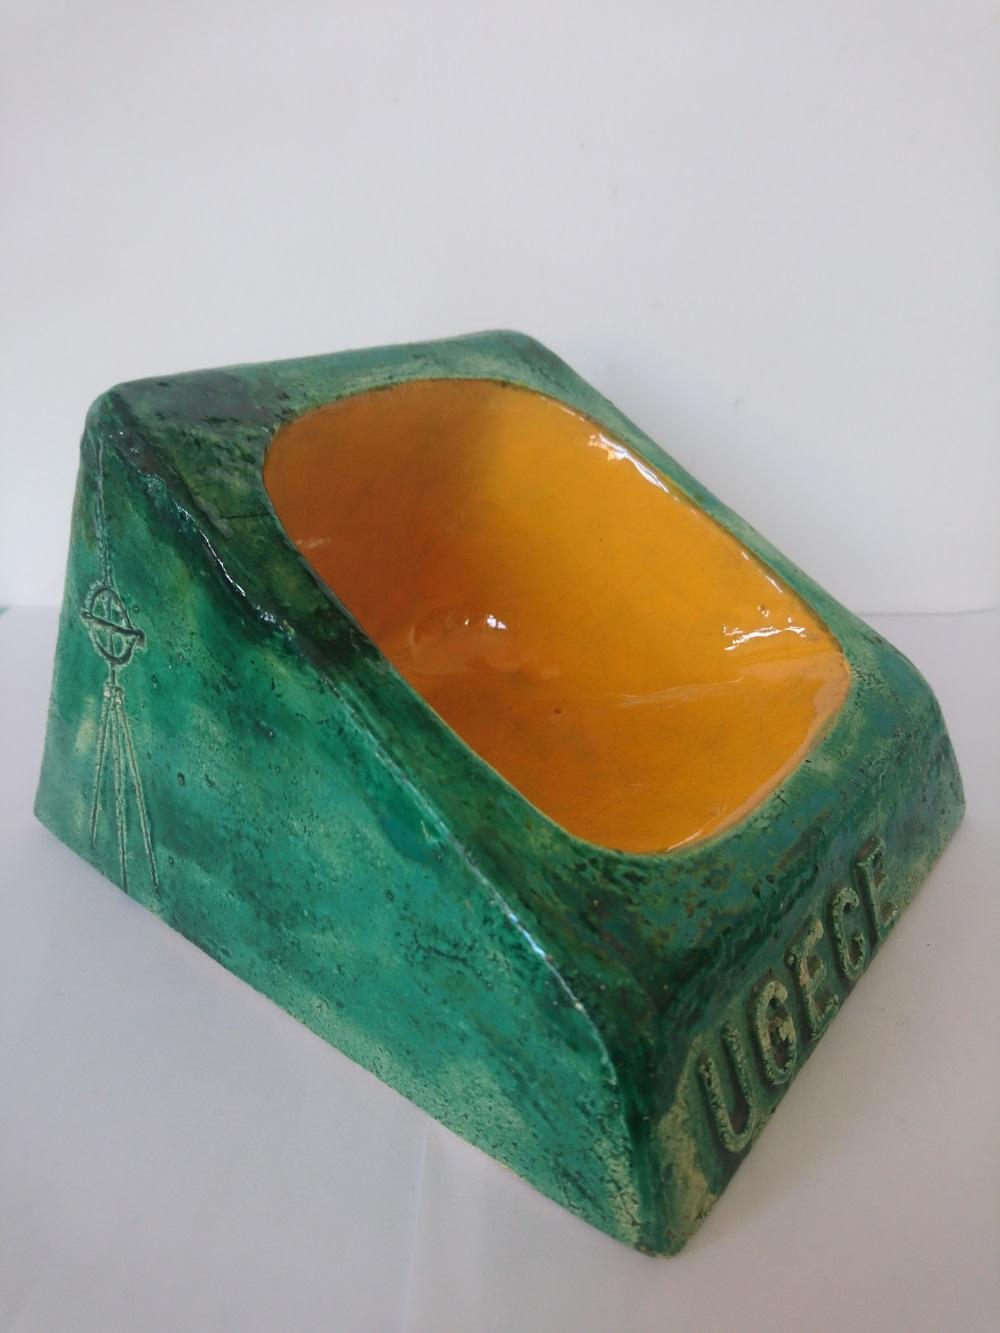 Ceramic ashtray or vide Poche by André Aleth Masson, Quimper, France 1960s
Beautiful dimensions
Good condition.

Measures: Height 12cm
Width 16.5cm
Depth 19cm.